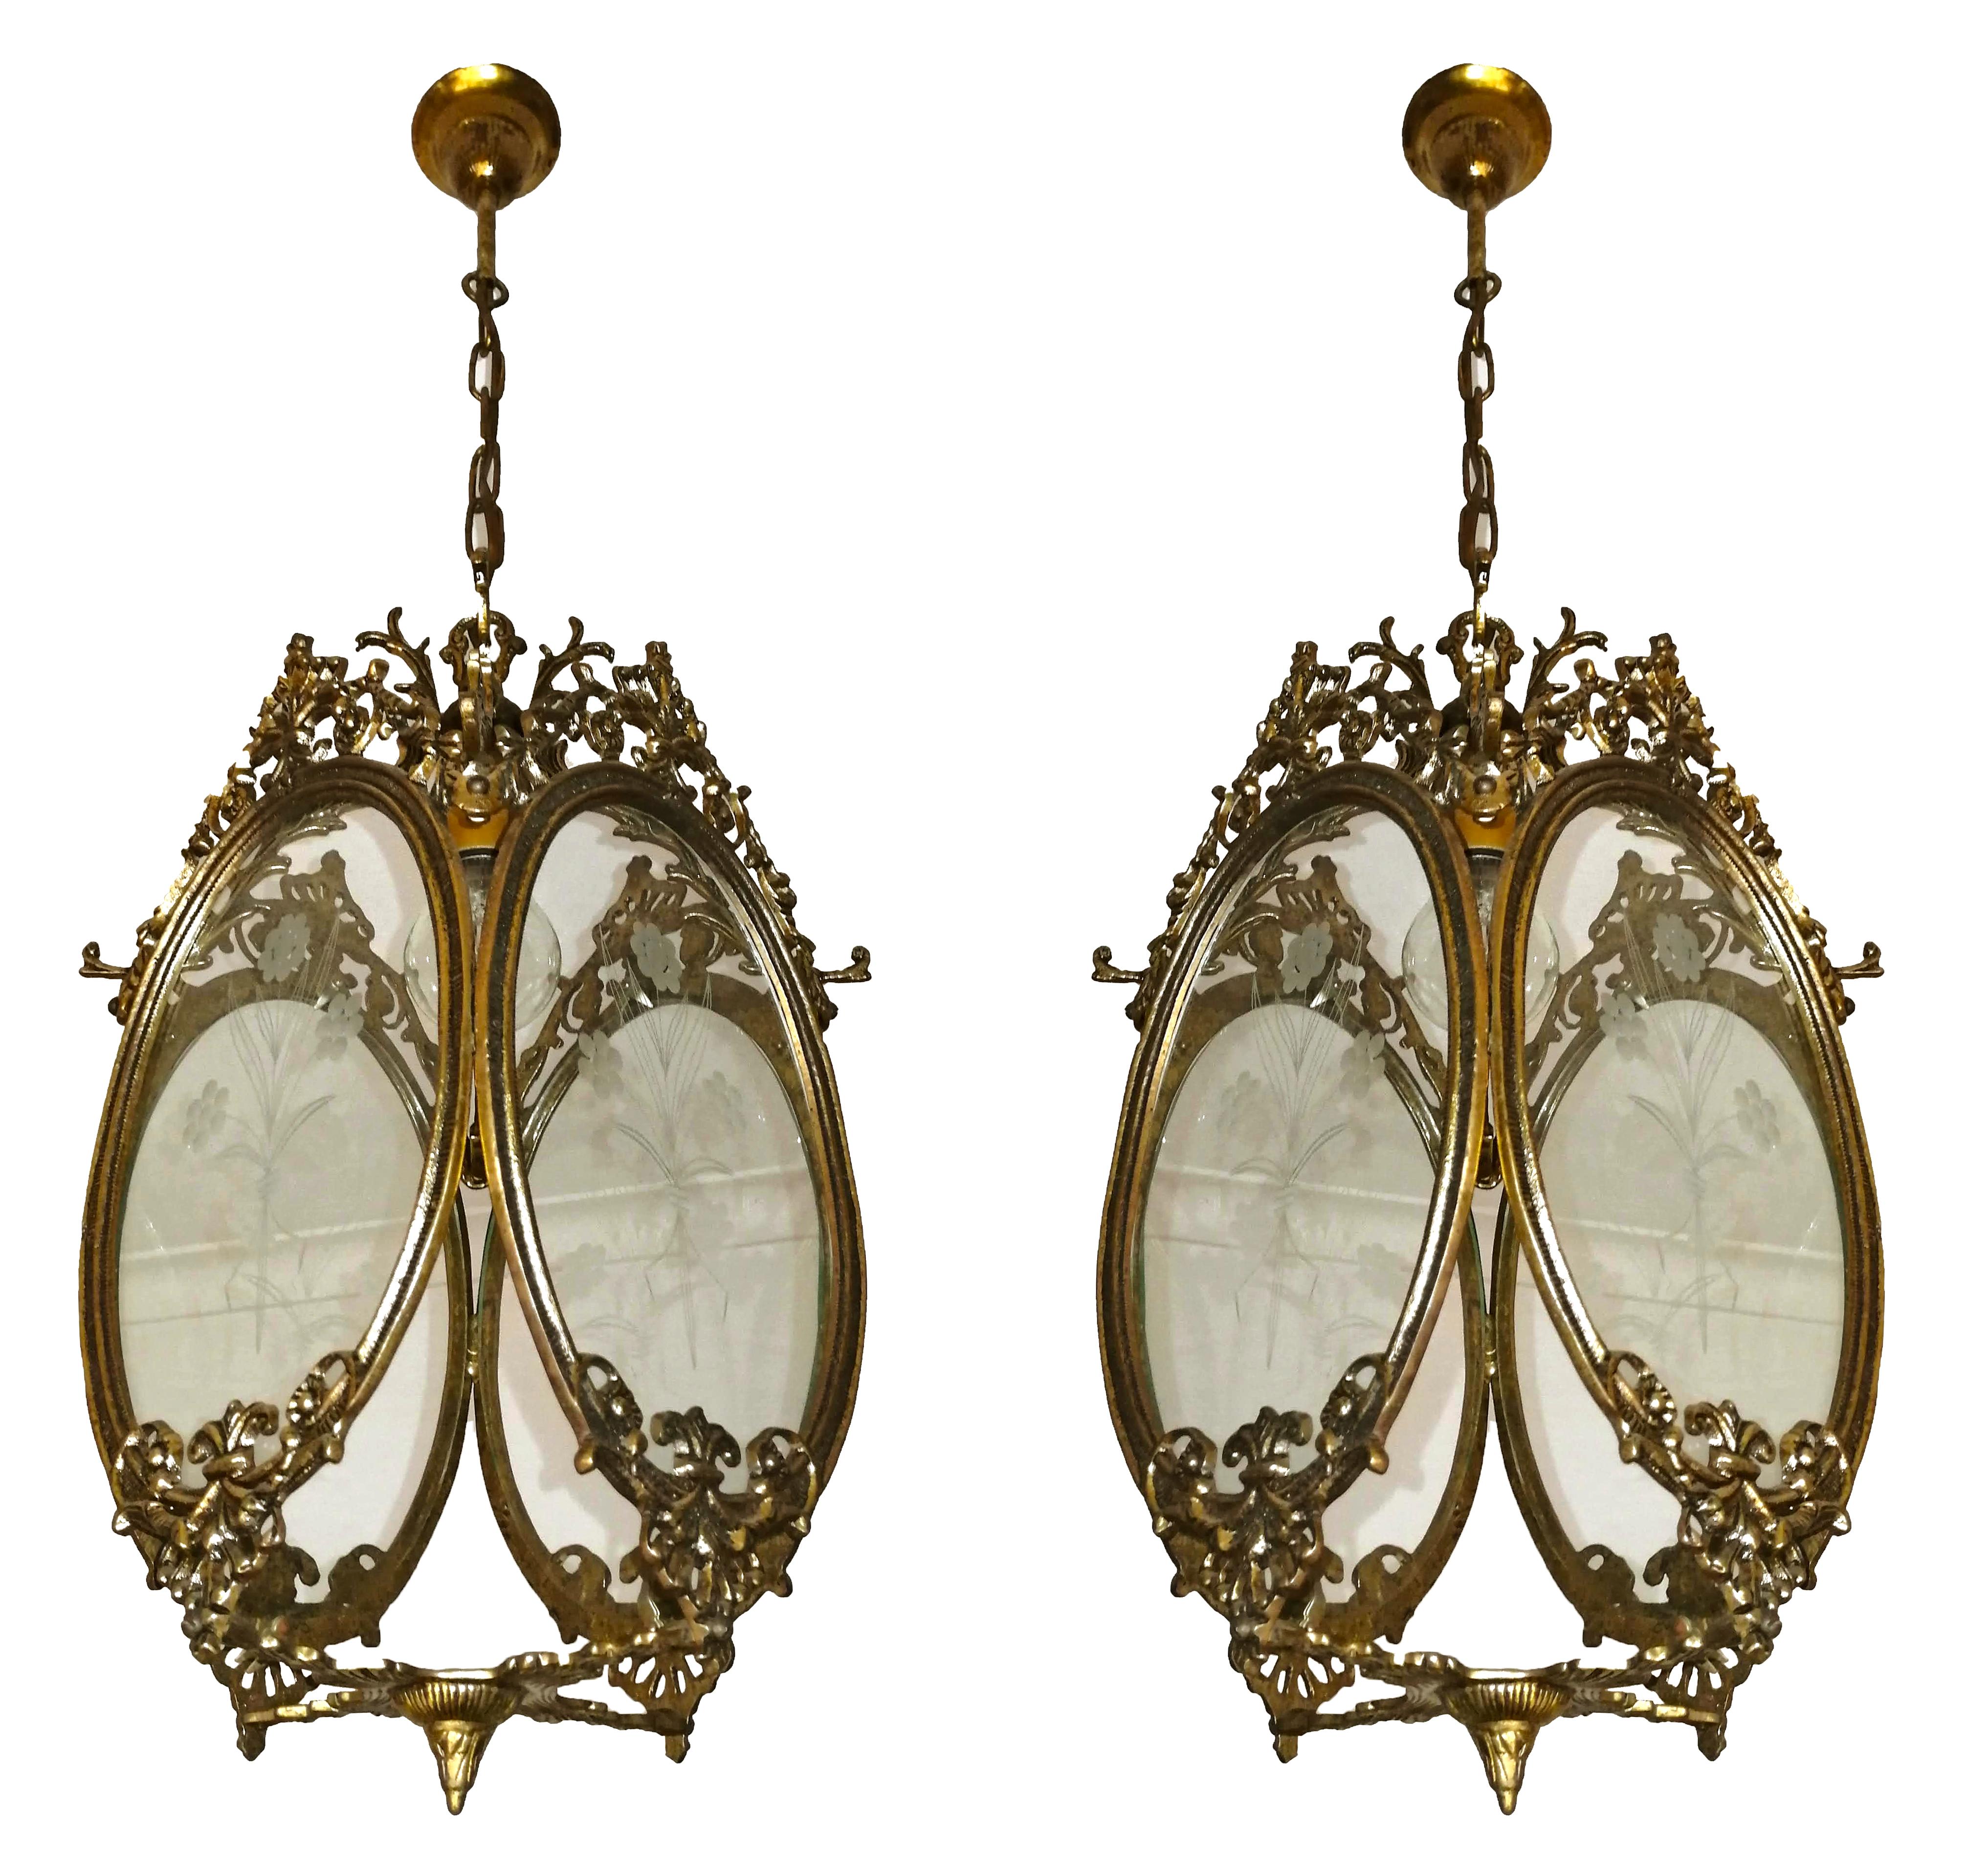 Cast Pair of Antique Louis XVI French Lanterns Chandeliers in Gilt Bronze & Cut Glass For Sale